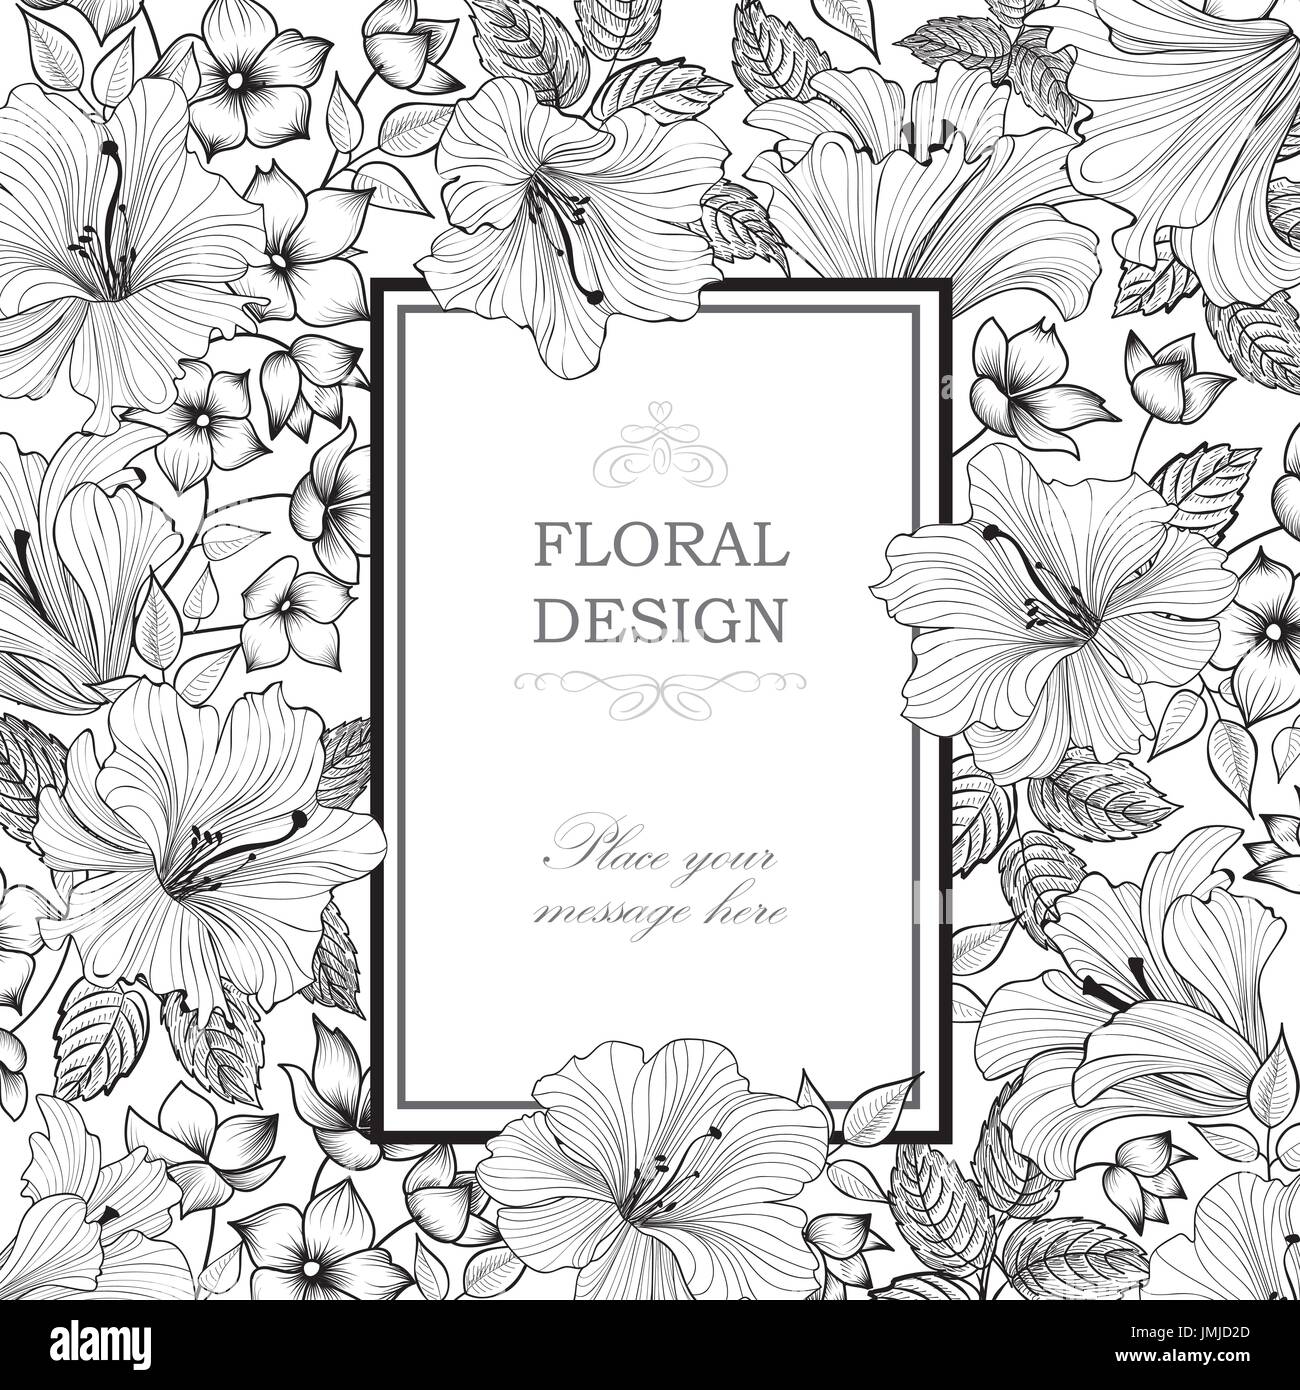 Floral background Black and White Stock Photos & Images - Alamy